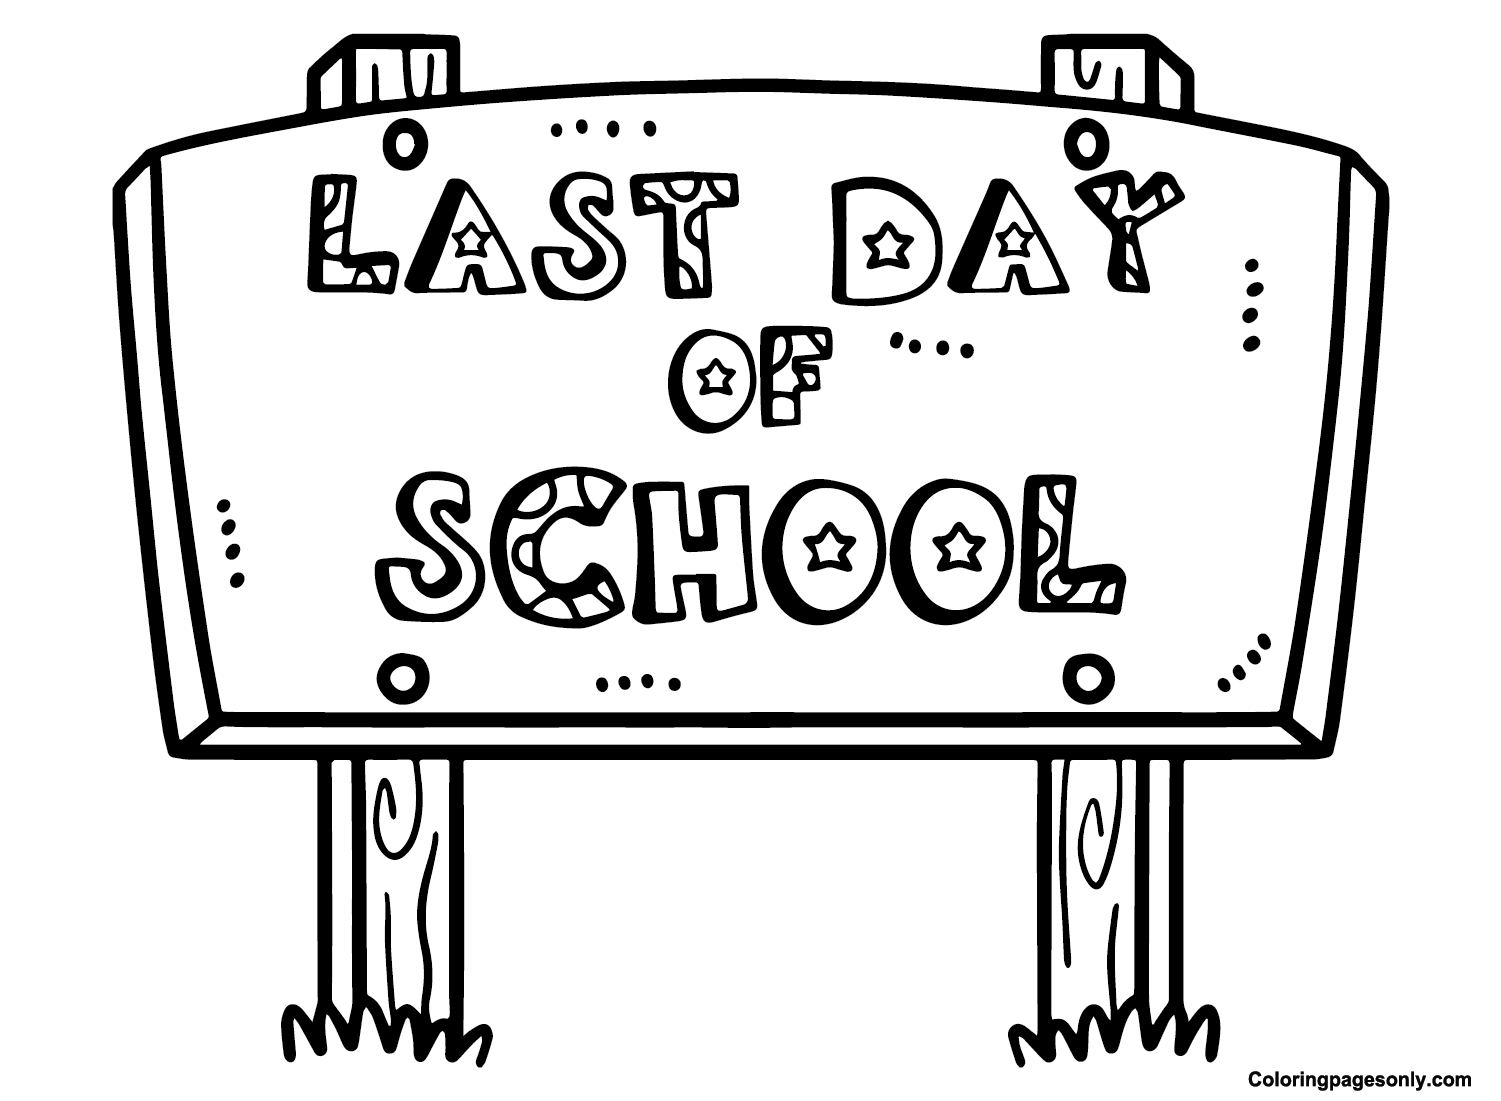 last-day-of-school-for-children-coloring-pages-last-day-of-school